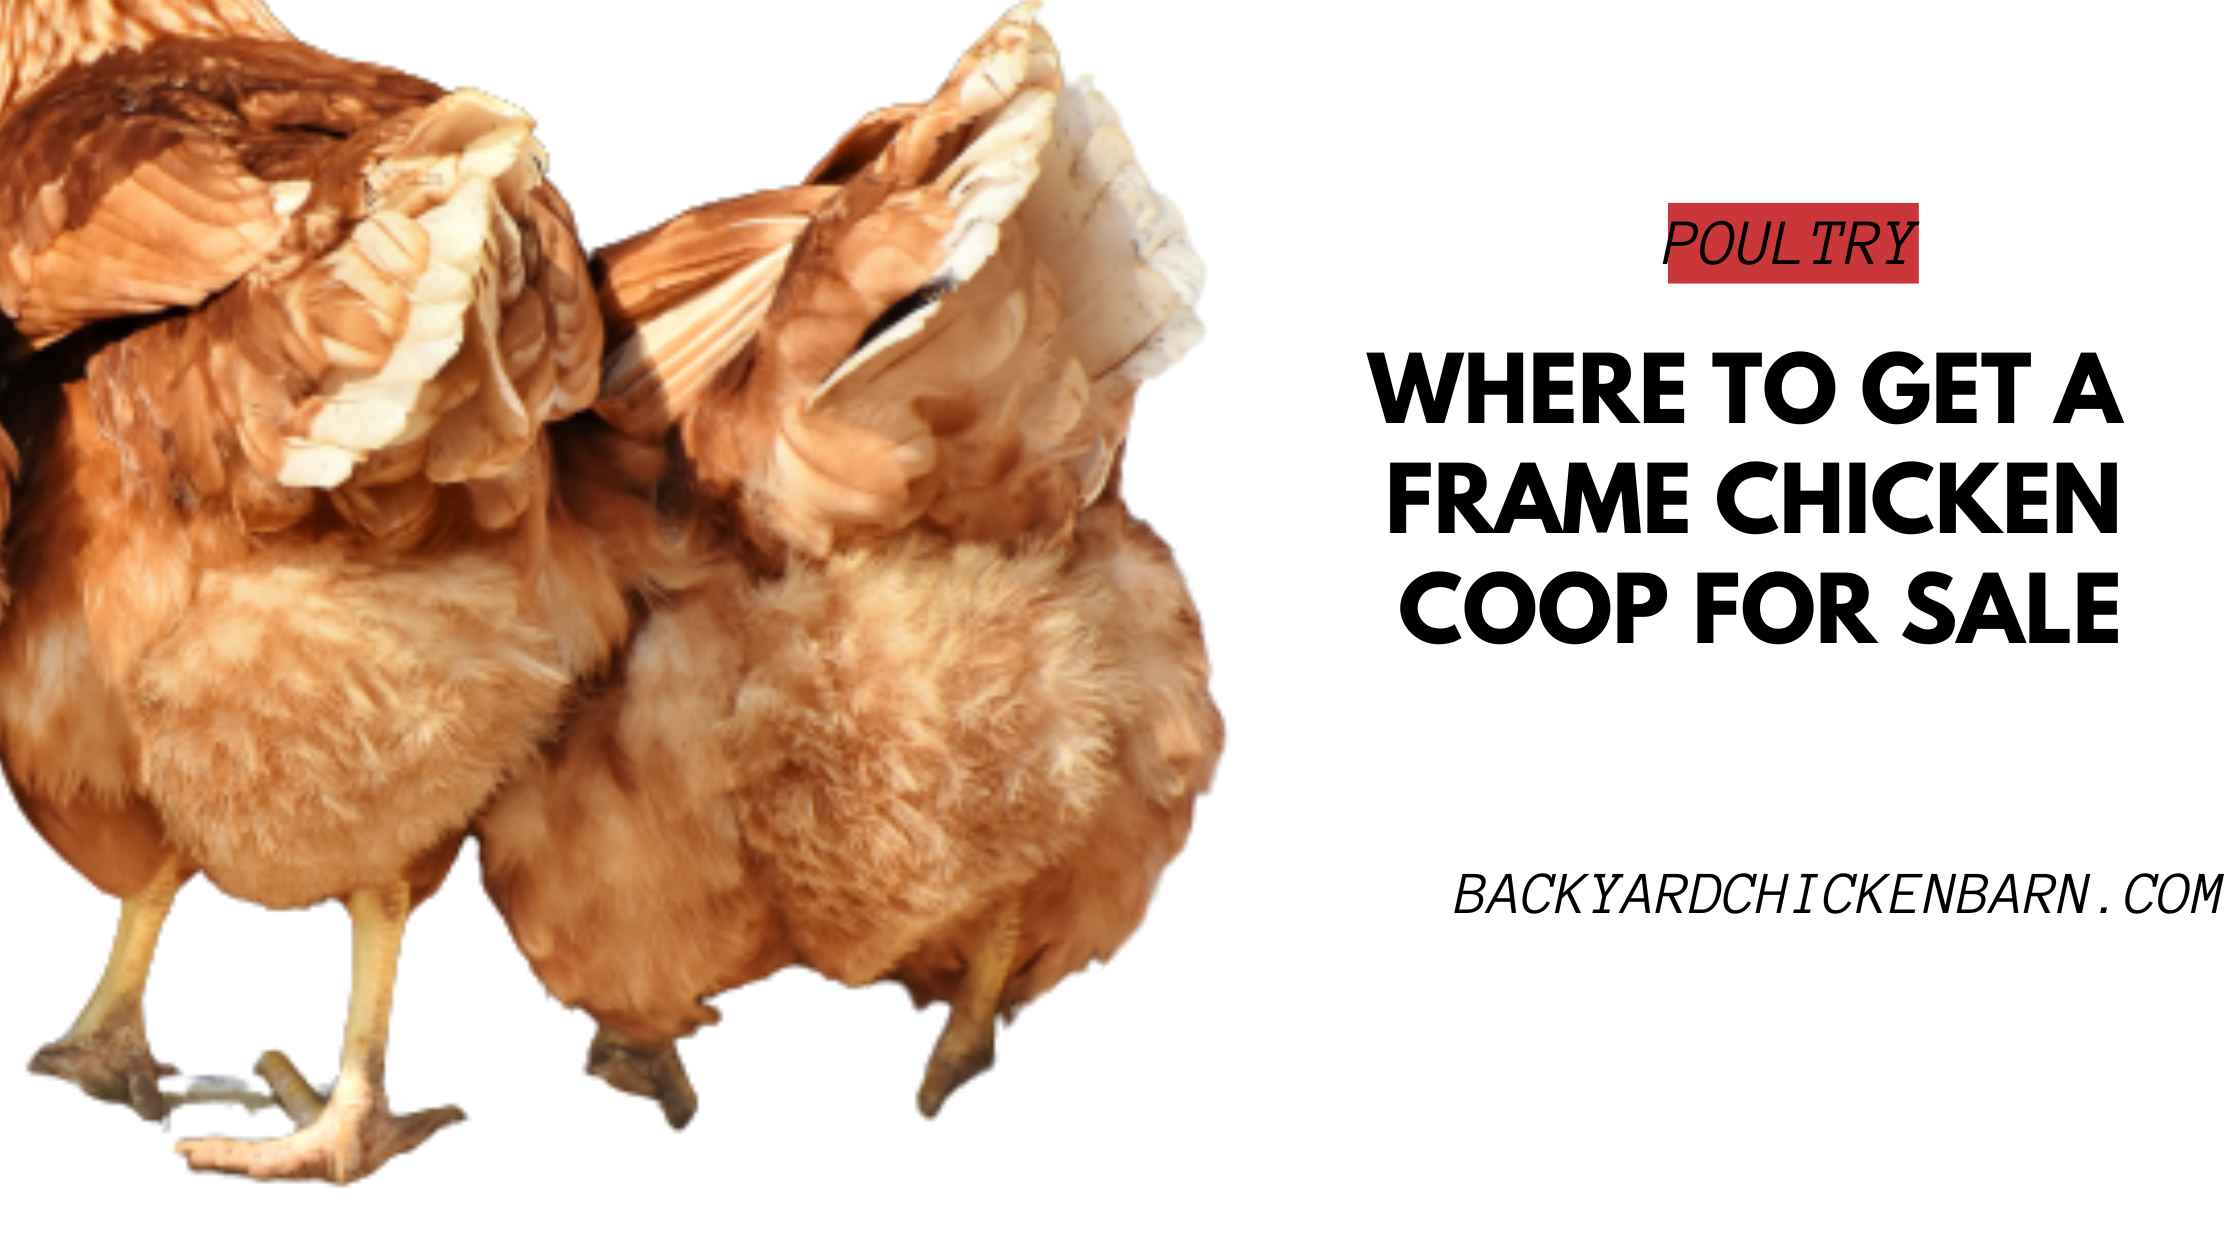 Where to Get a Frame Chicken Coop for Sale